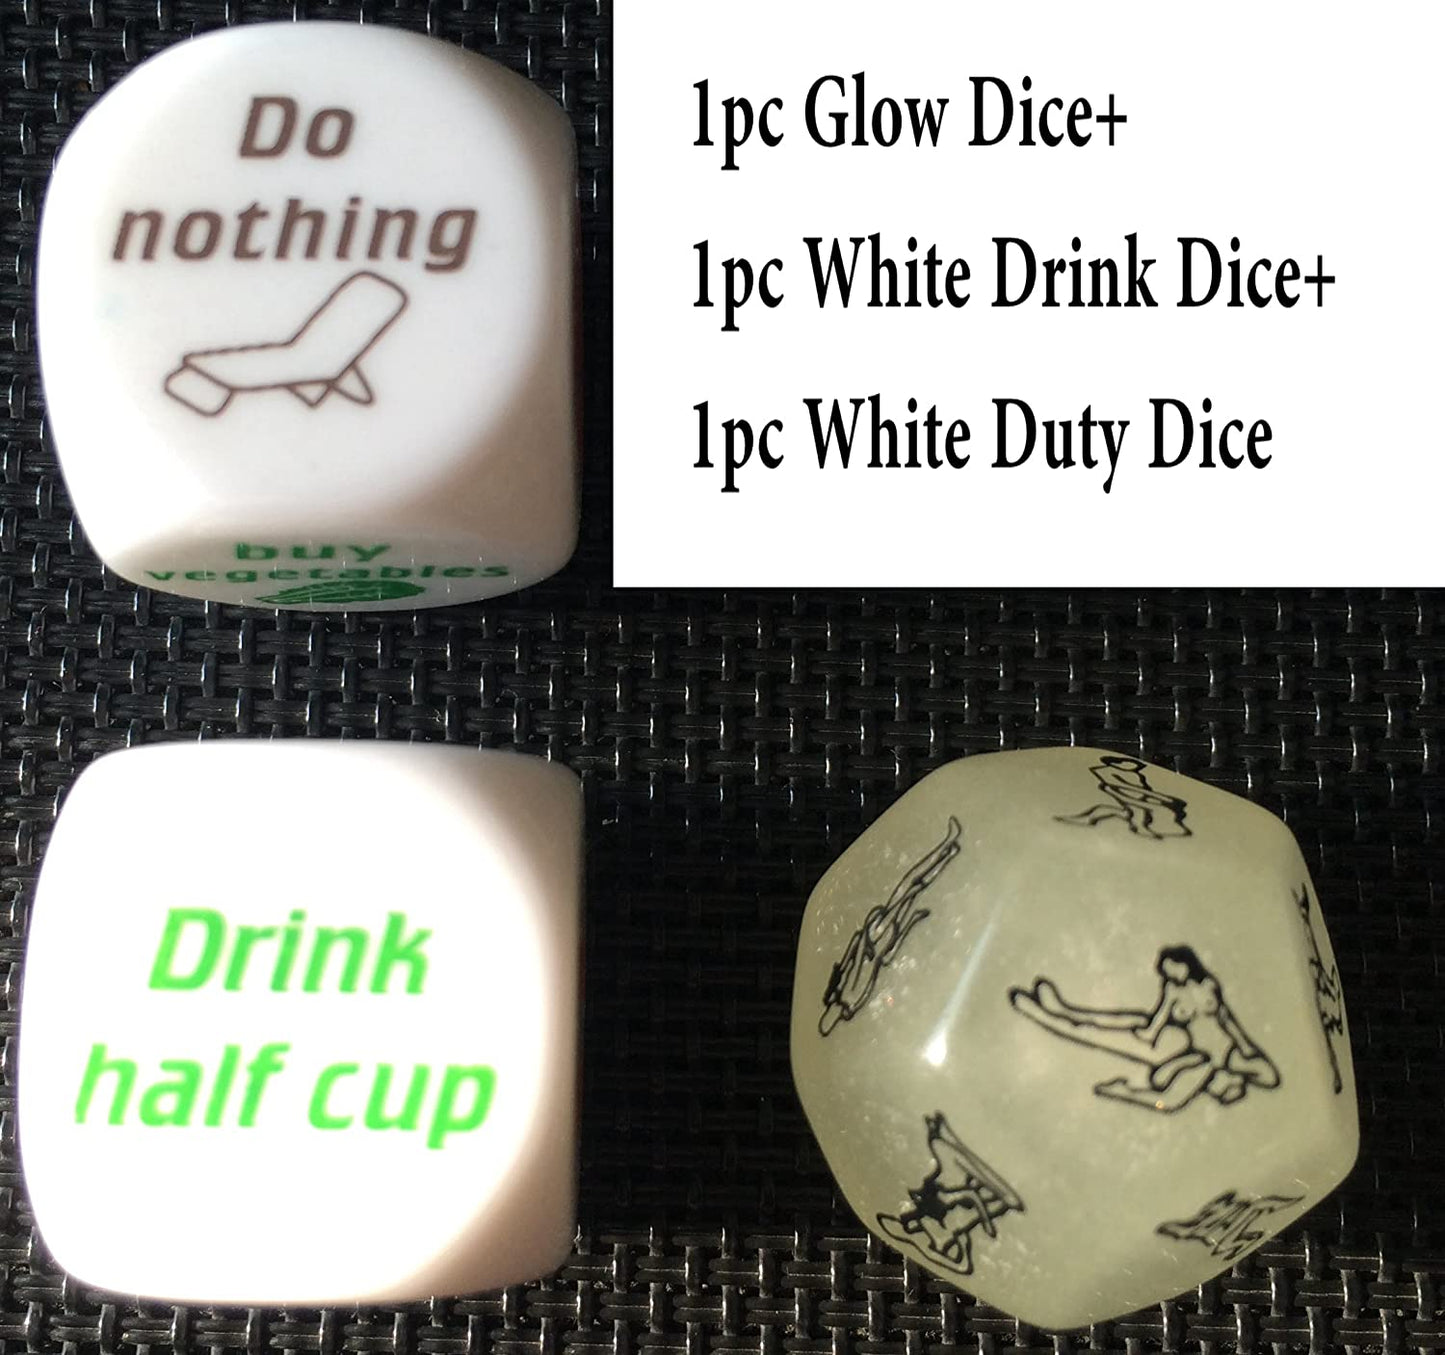 U-SHARK® Glow in the Dark Valentine's Day Funny Couple Partner Fitness Games Bar Party Pub Sexy Dice Fun Toy Game Pro Glow 12 Sides Funny Luminous Sex Dice for Bachelor Party or Couples Novelty Gift